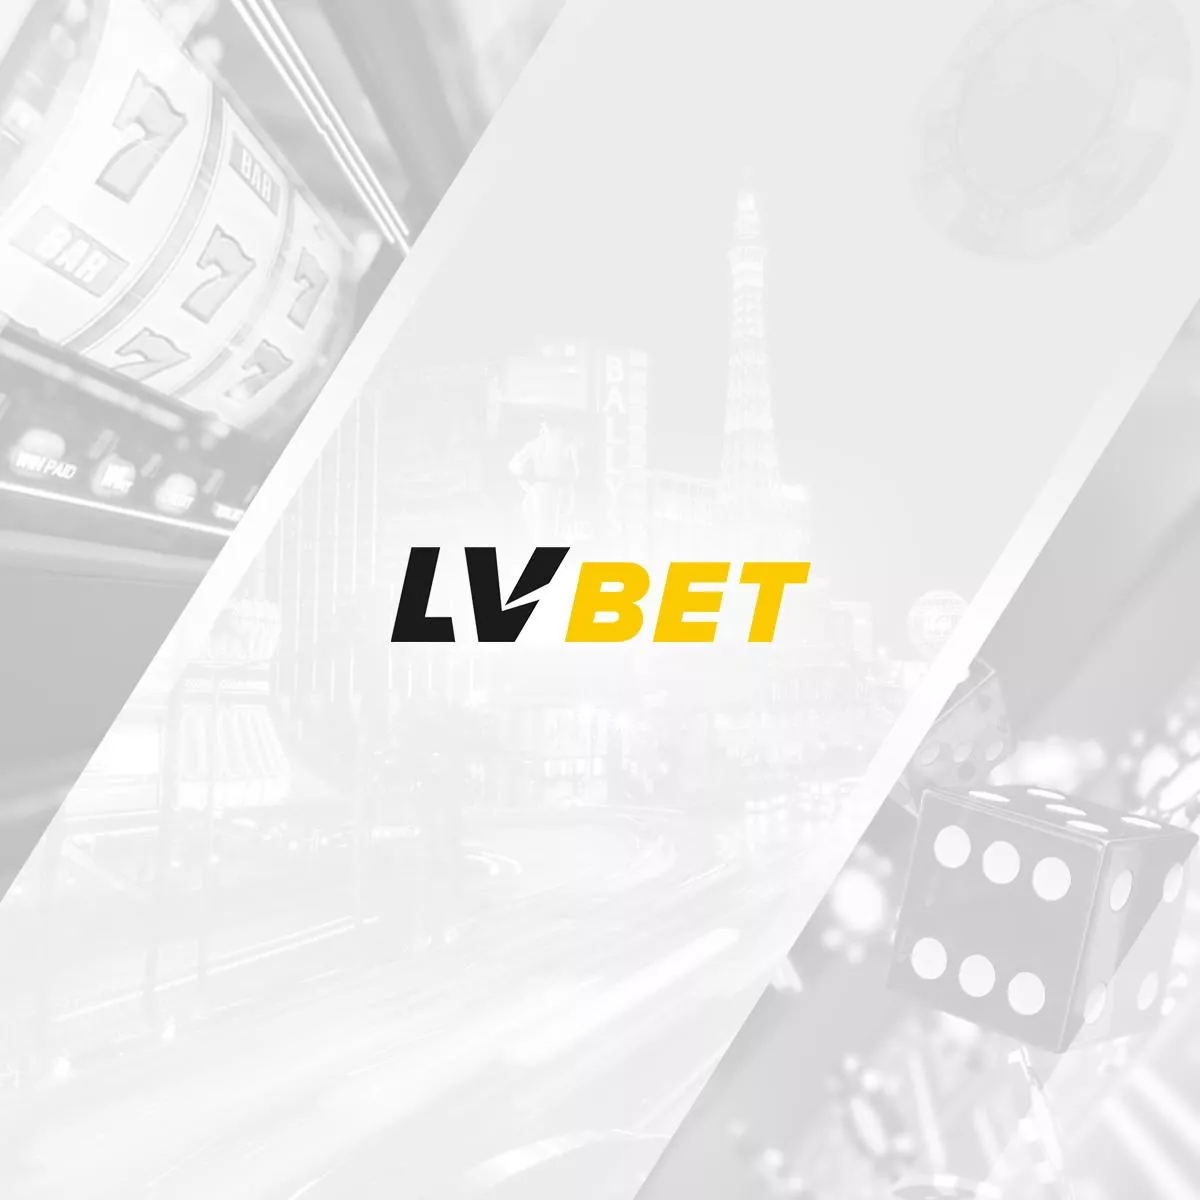 What Everyone Must Know About LVBet Casino